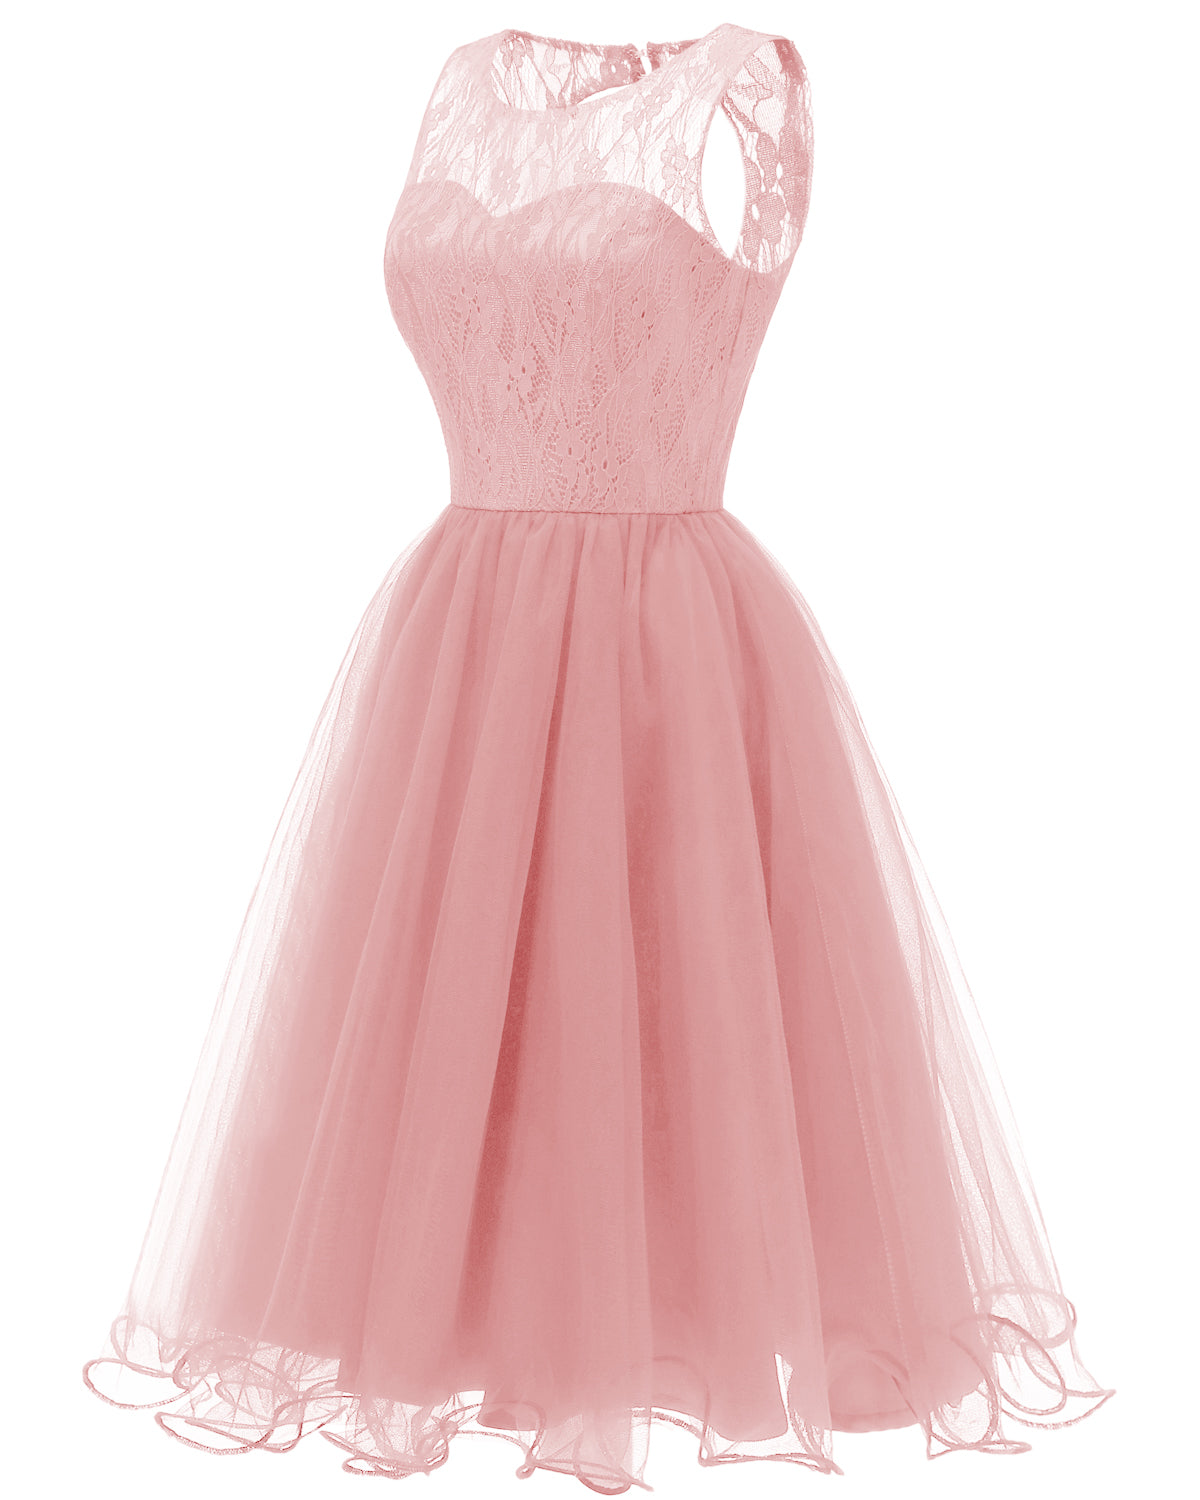 Pink Retro Modest Navy Lace Tulle Cocktail Dress Short Homecoming Dress, 074P-Dolly Gown